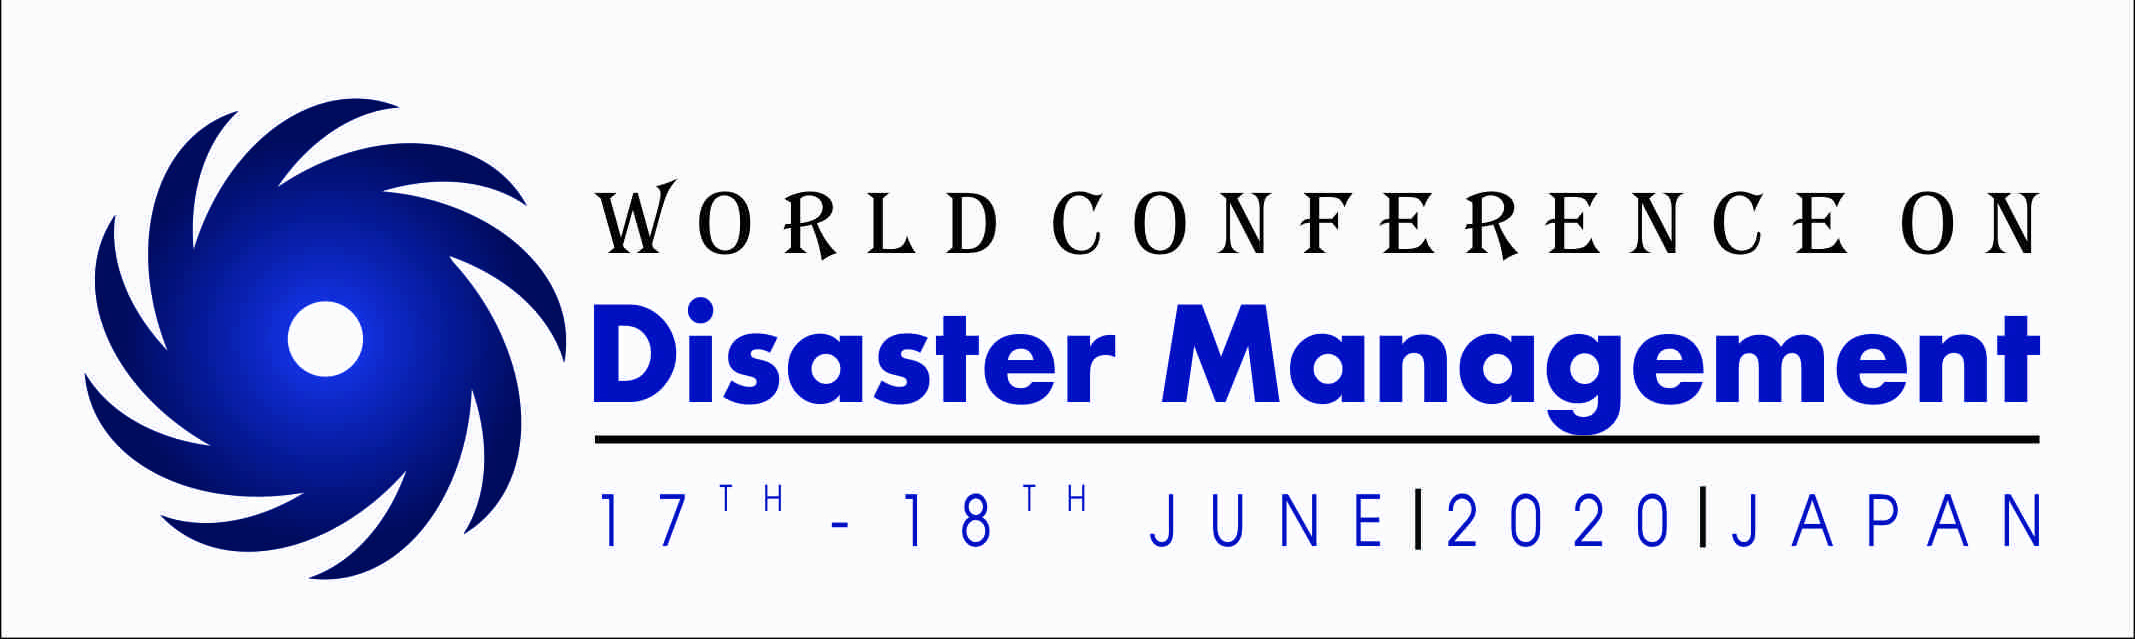 World conference on disaster management, Badung, Bali, Indonesia